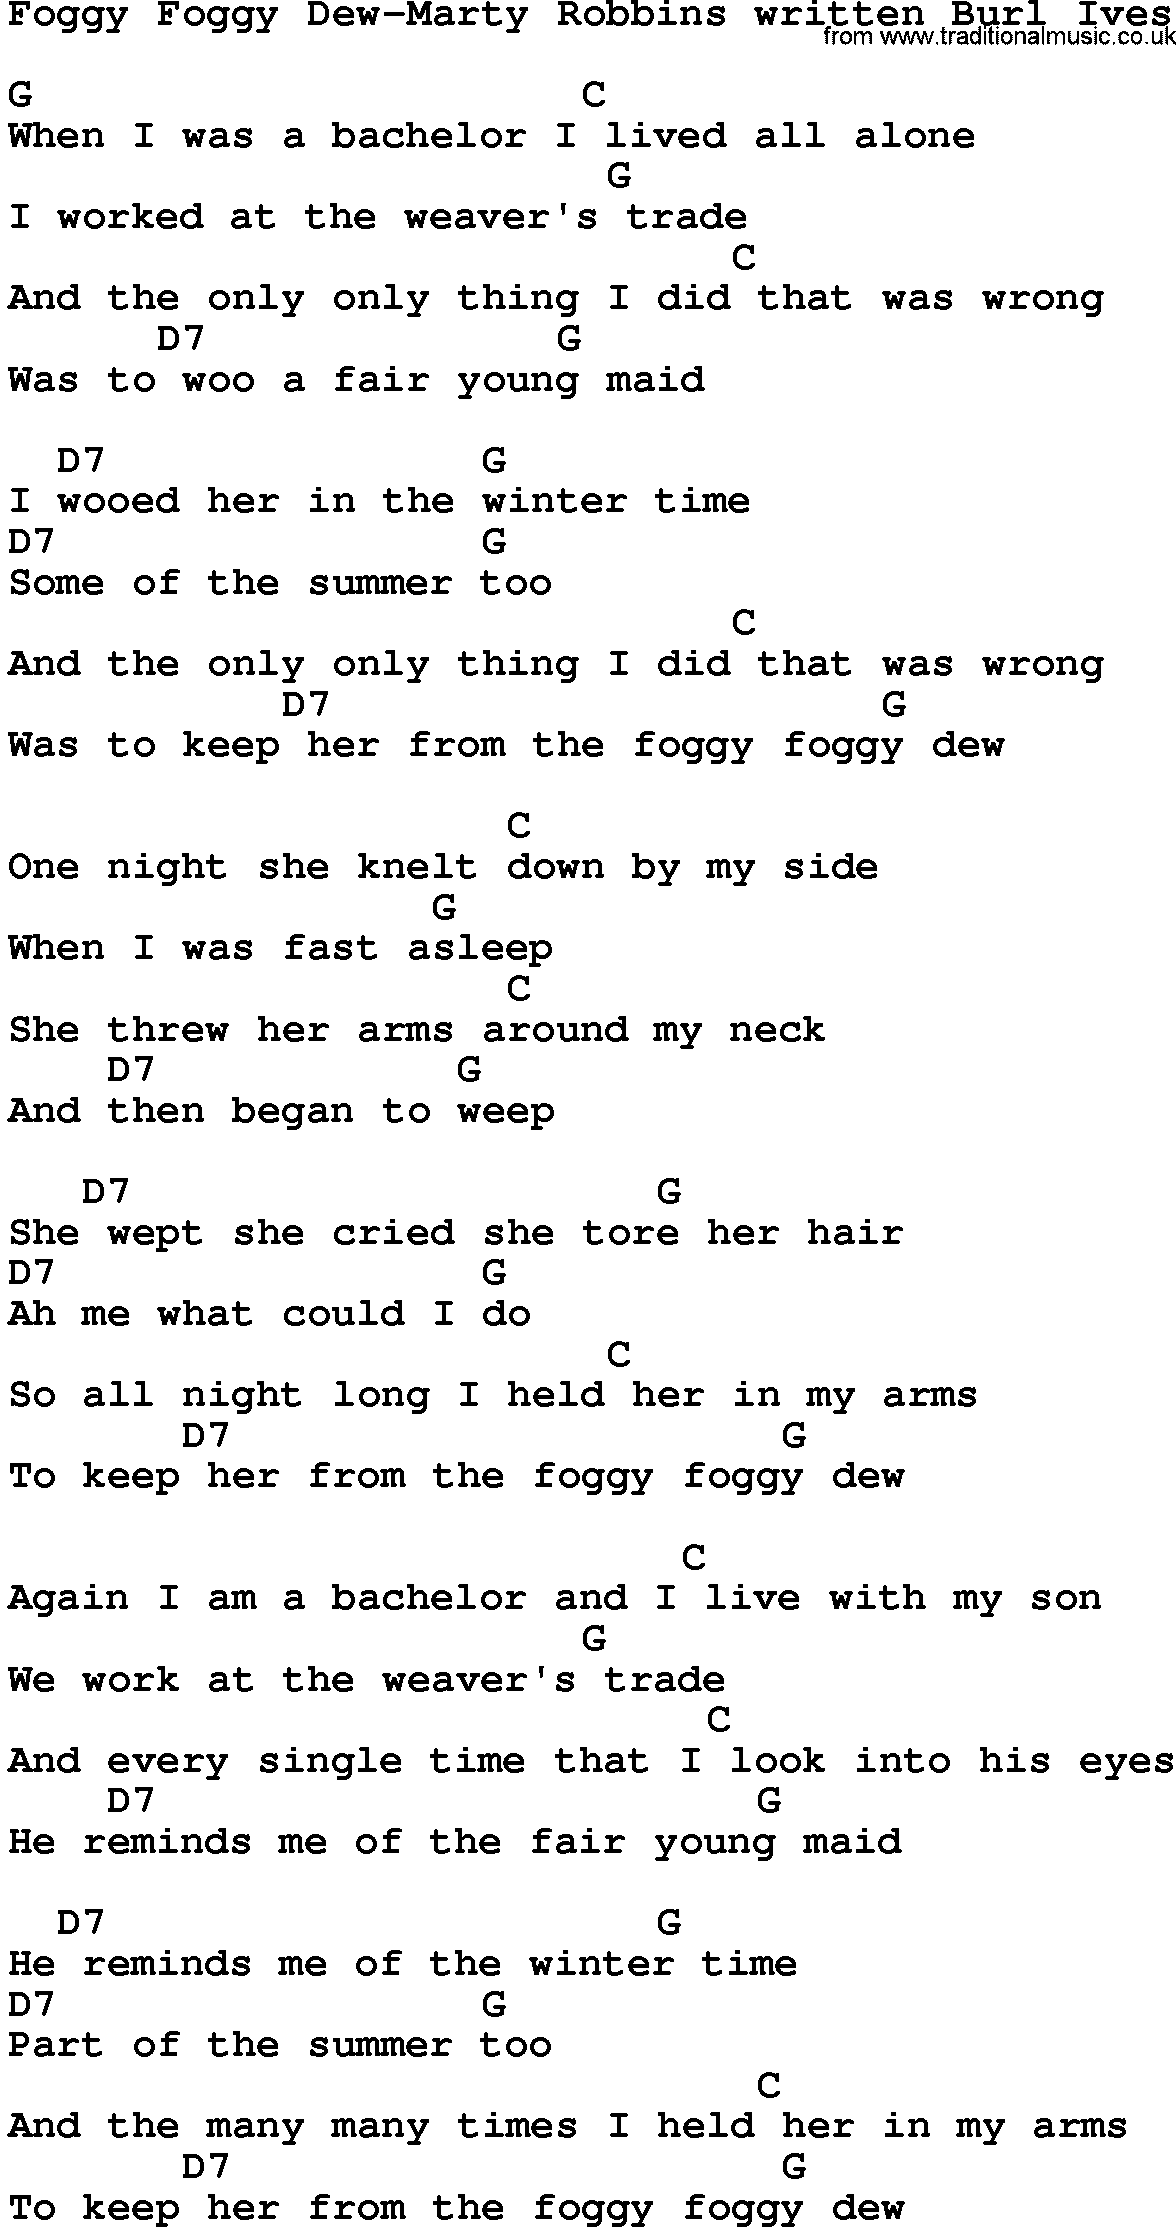 Country music song: Foggy Foggy Dew-Marty Robbins Written Burl Ives lyrics and chords